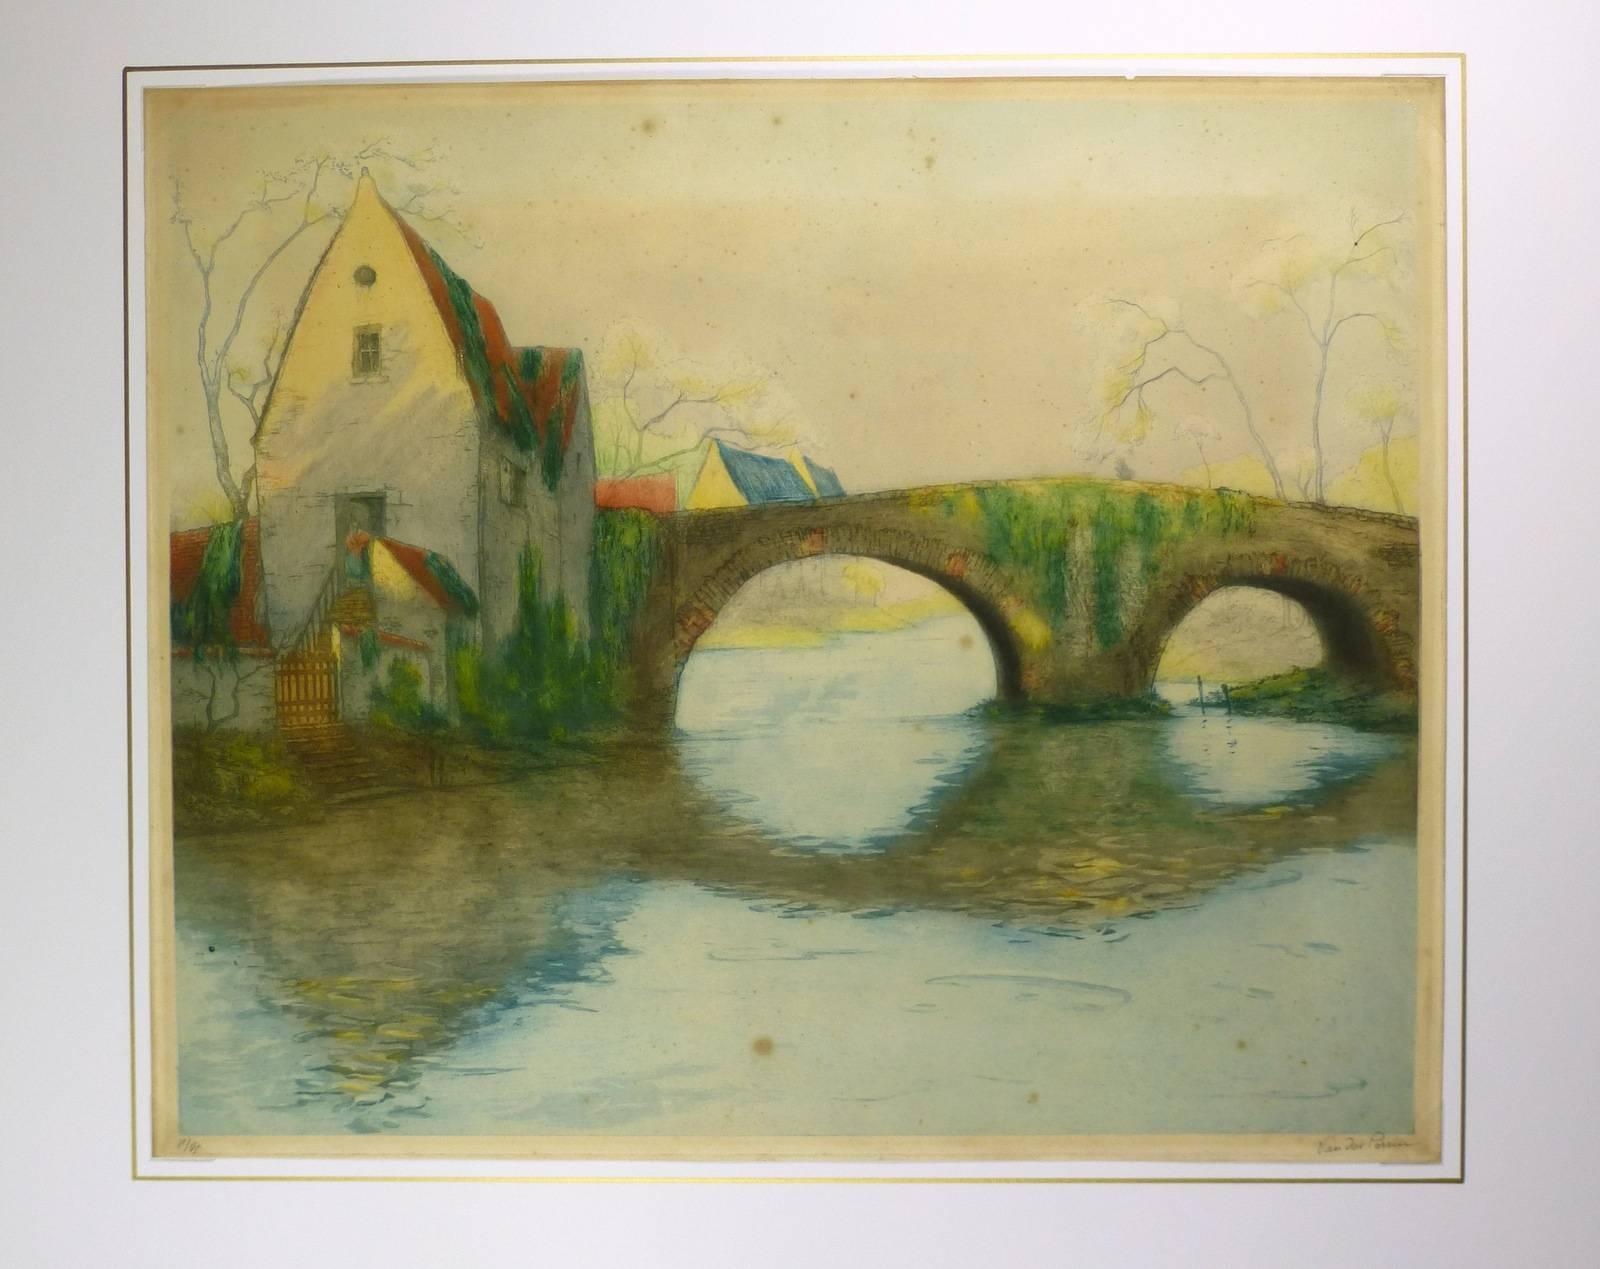 Stone Bridge over River - Brown Landscape Painting by Unknown